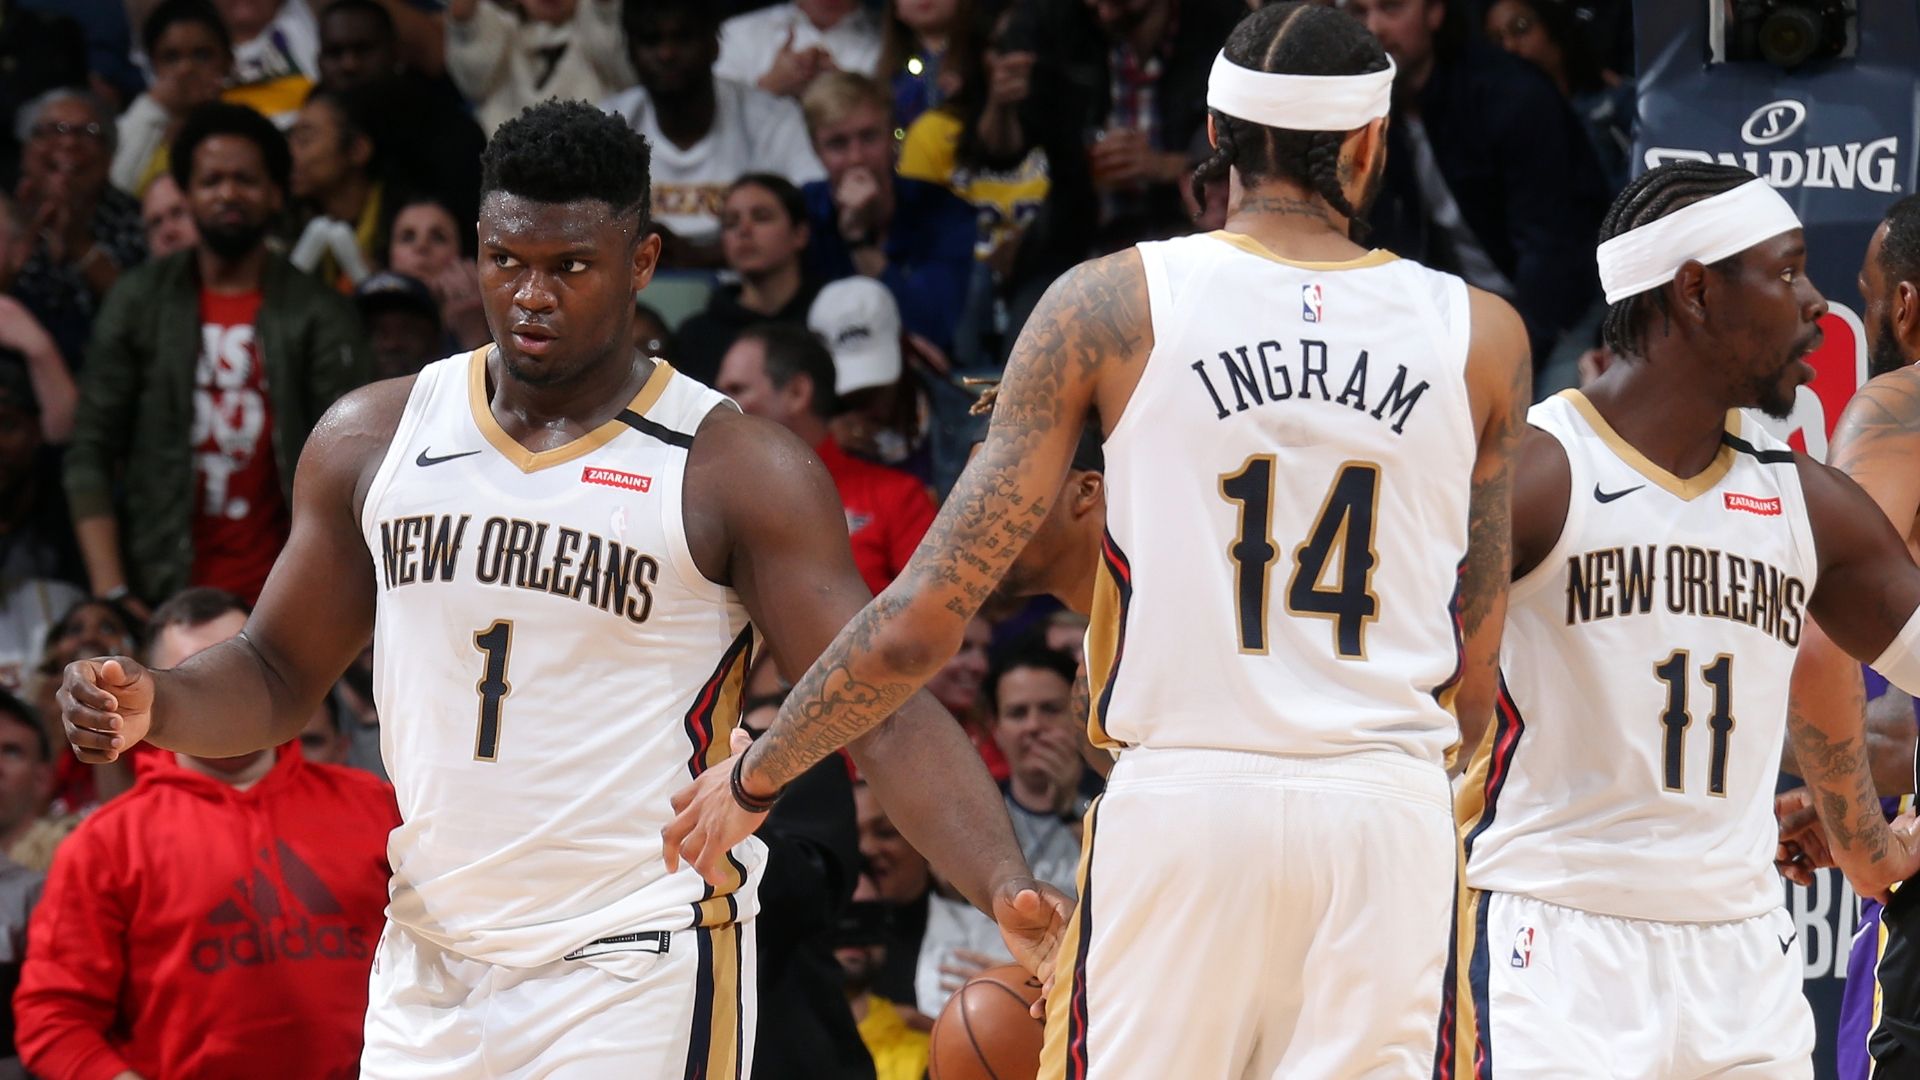 Do the Pelicans have a realistic chance to make the playoffs? ESPN Video